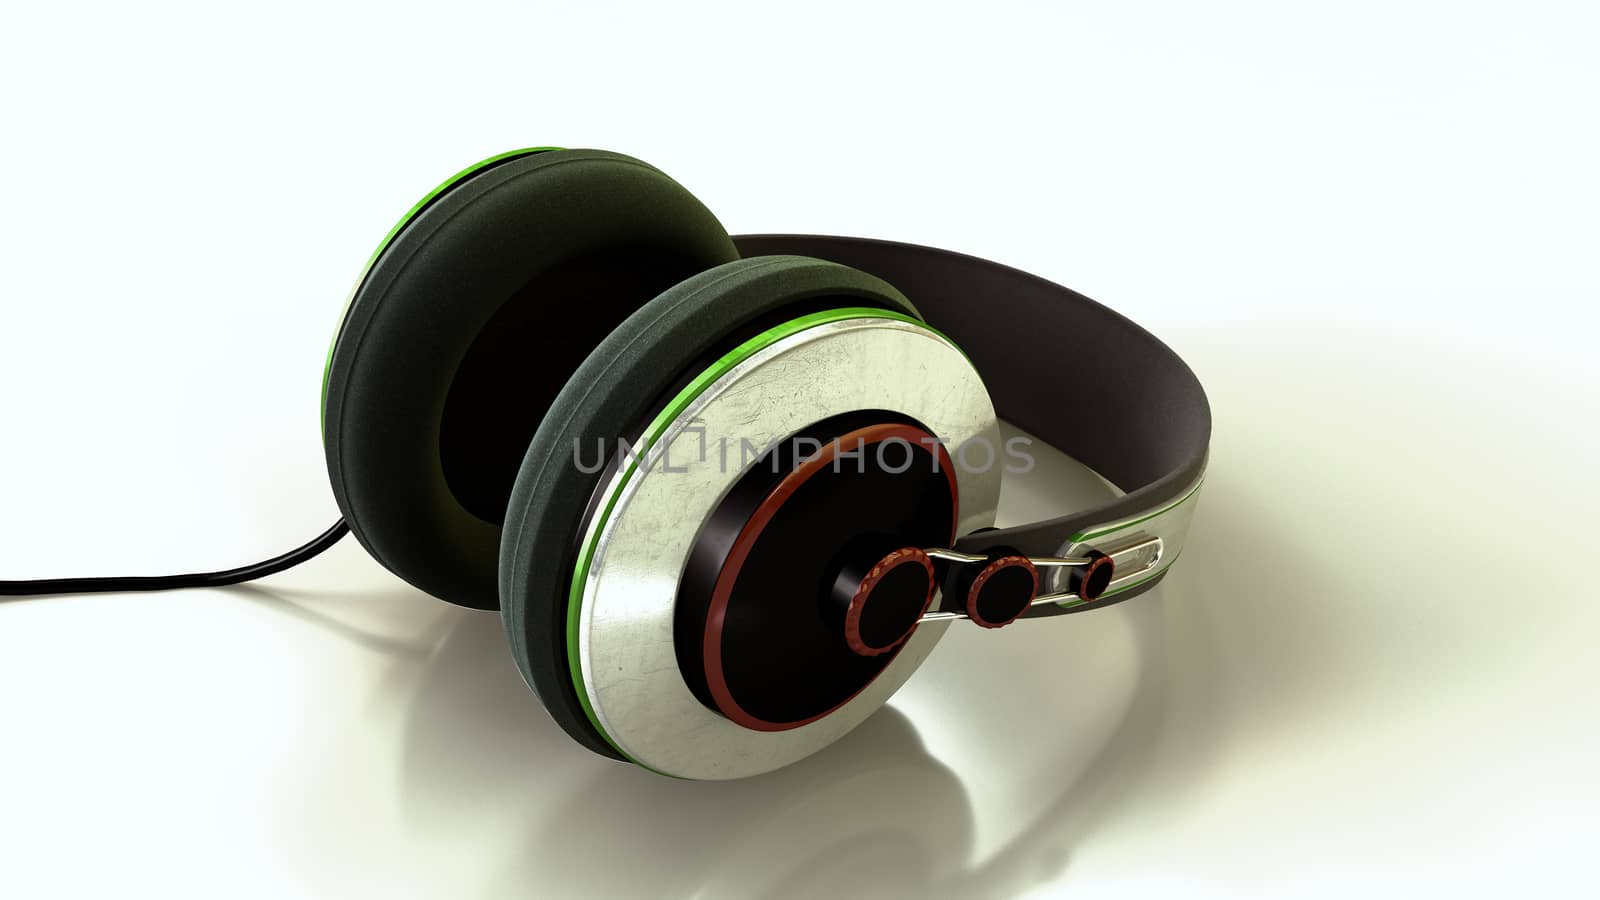 Colorful Headphones on reflective surface by stockbp